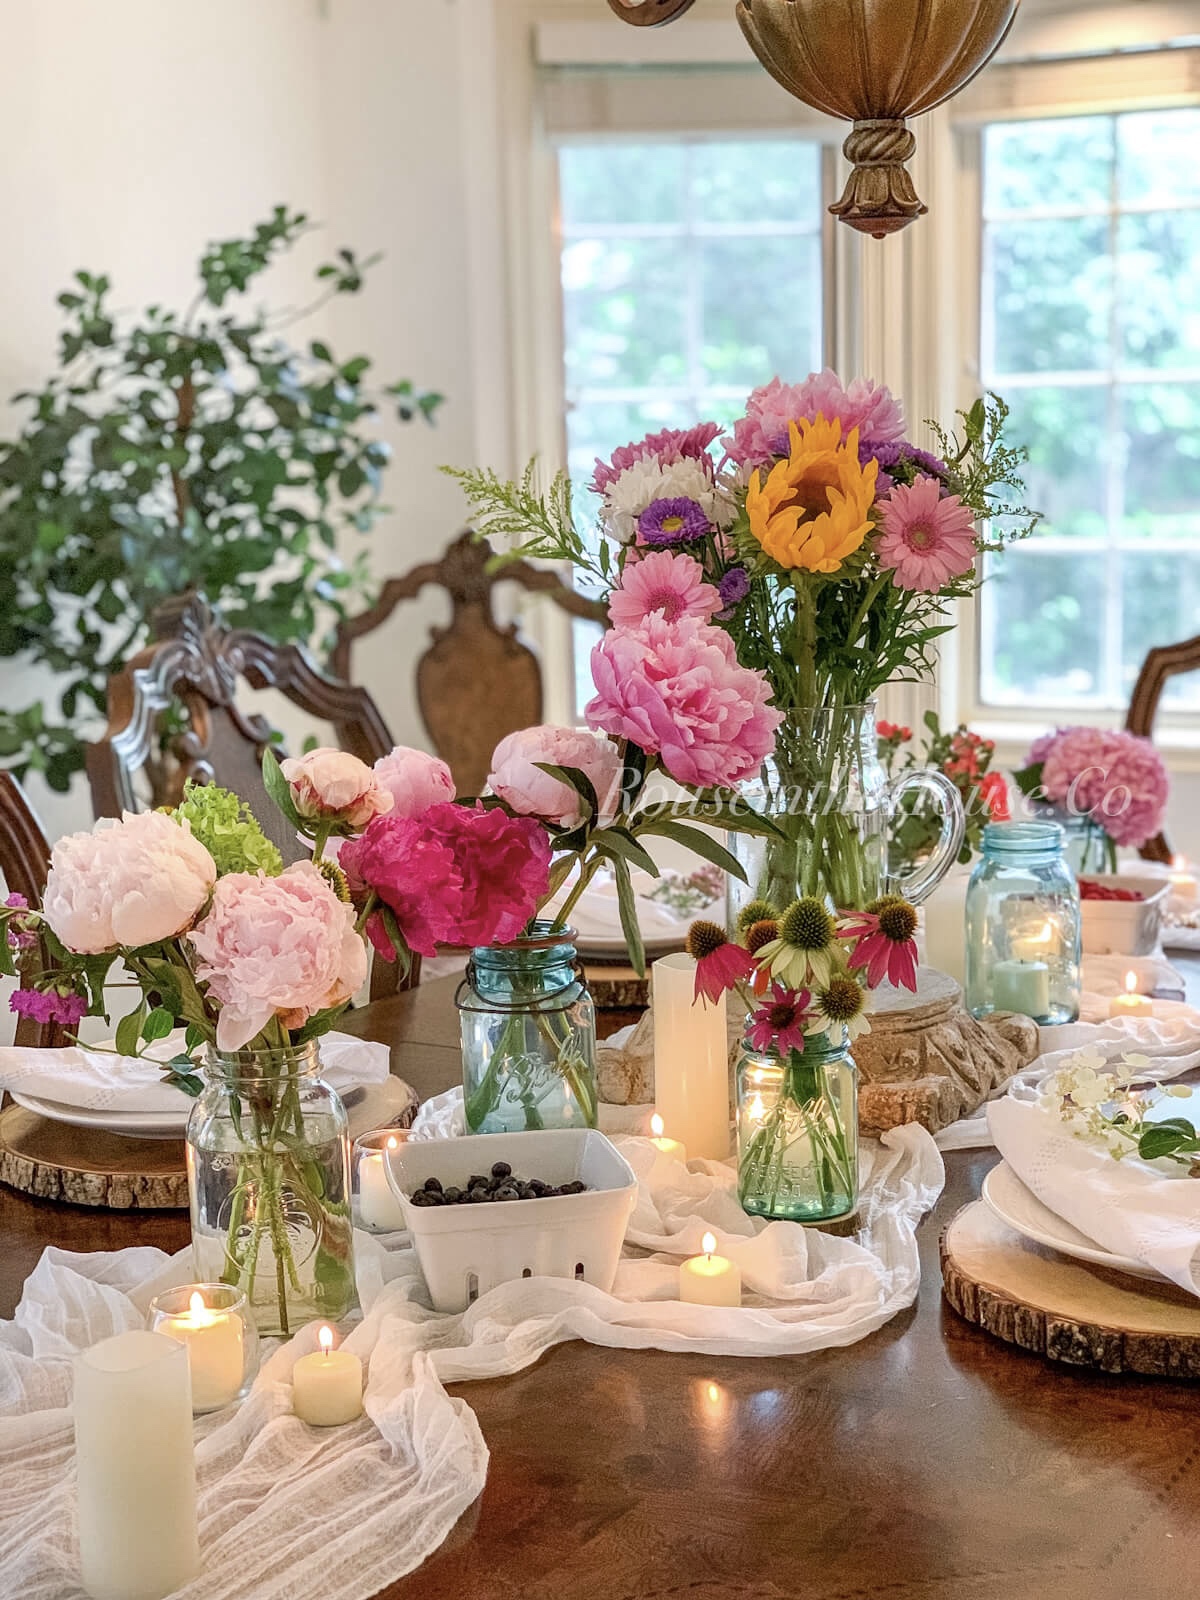 Small & medium arrangements of summer flowers in mason jars sit next to lit votive candles and berries in white berry crates. A beautiful sunflower, daisy and peony arrangement is in the center of the table.